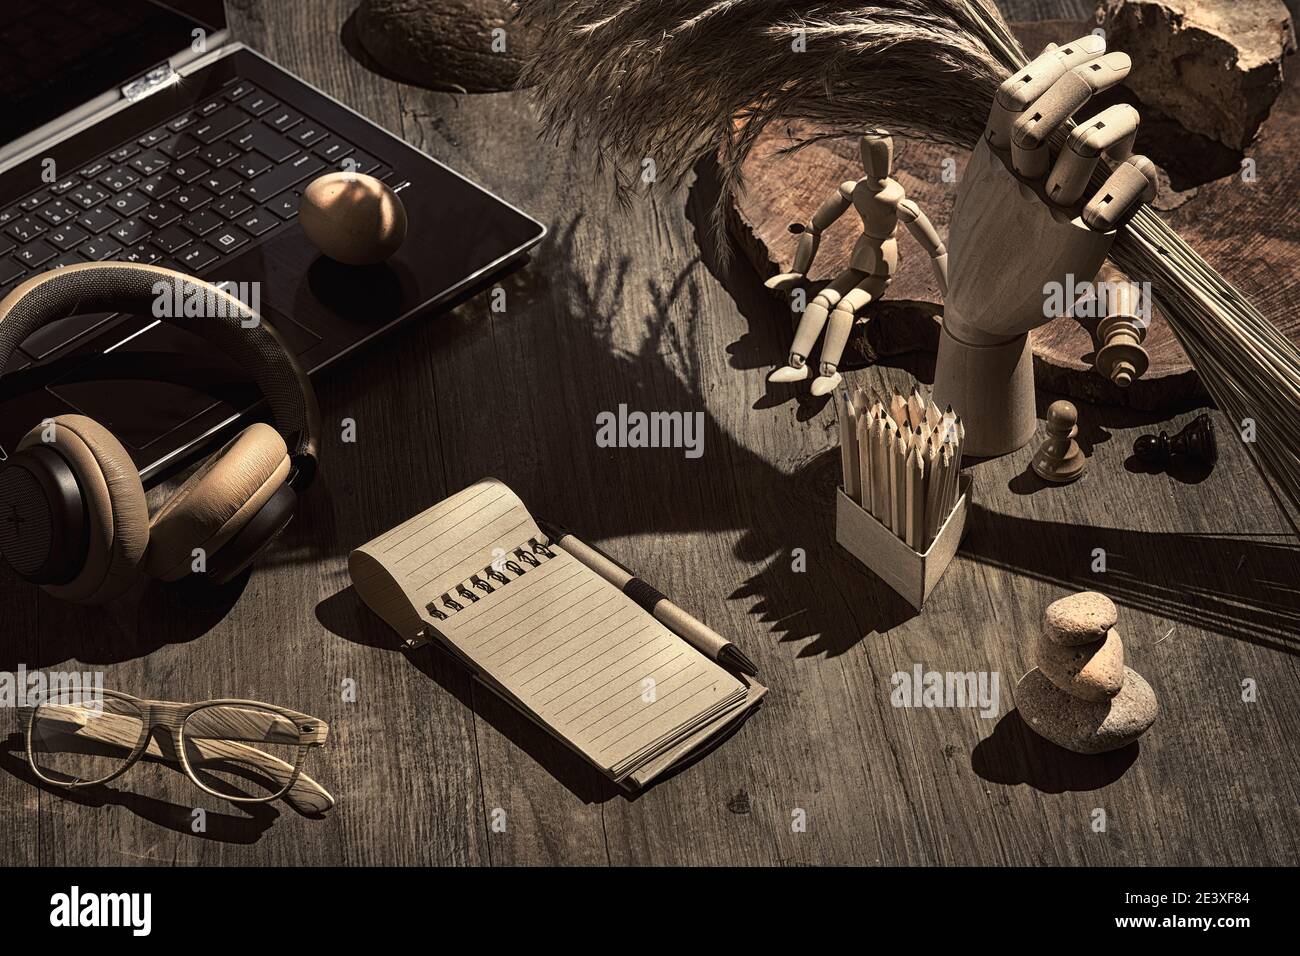 Creative writing concept, vintage look. Open block note. Glasses, laptop, leather earphones. Surreal decor. Chess figures, hand model with dry grass Stock Photo